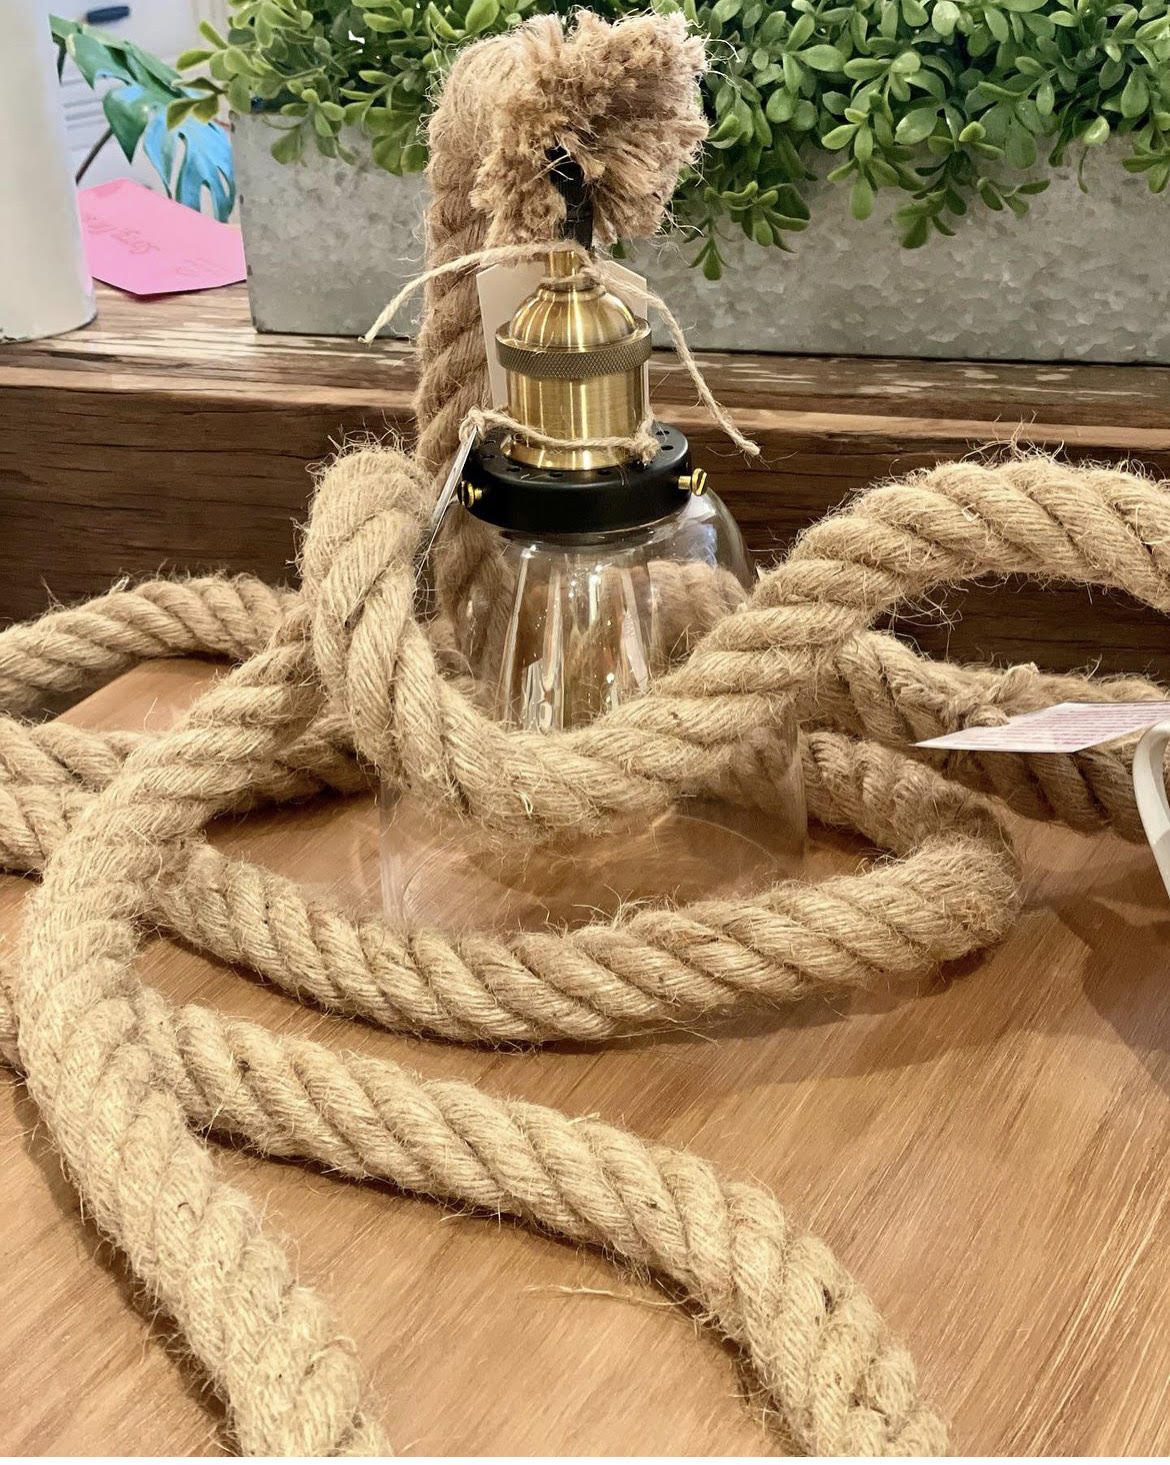 The Charlotte Small Glass Rope Light